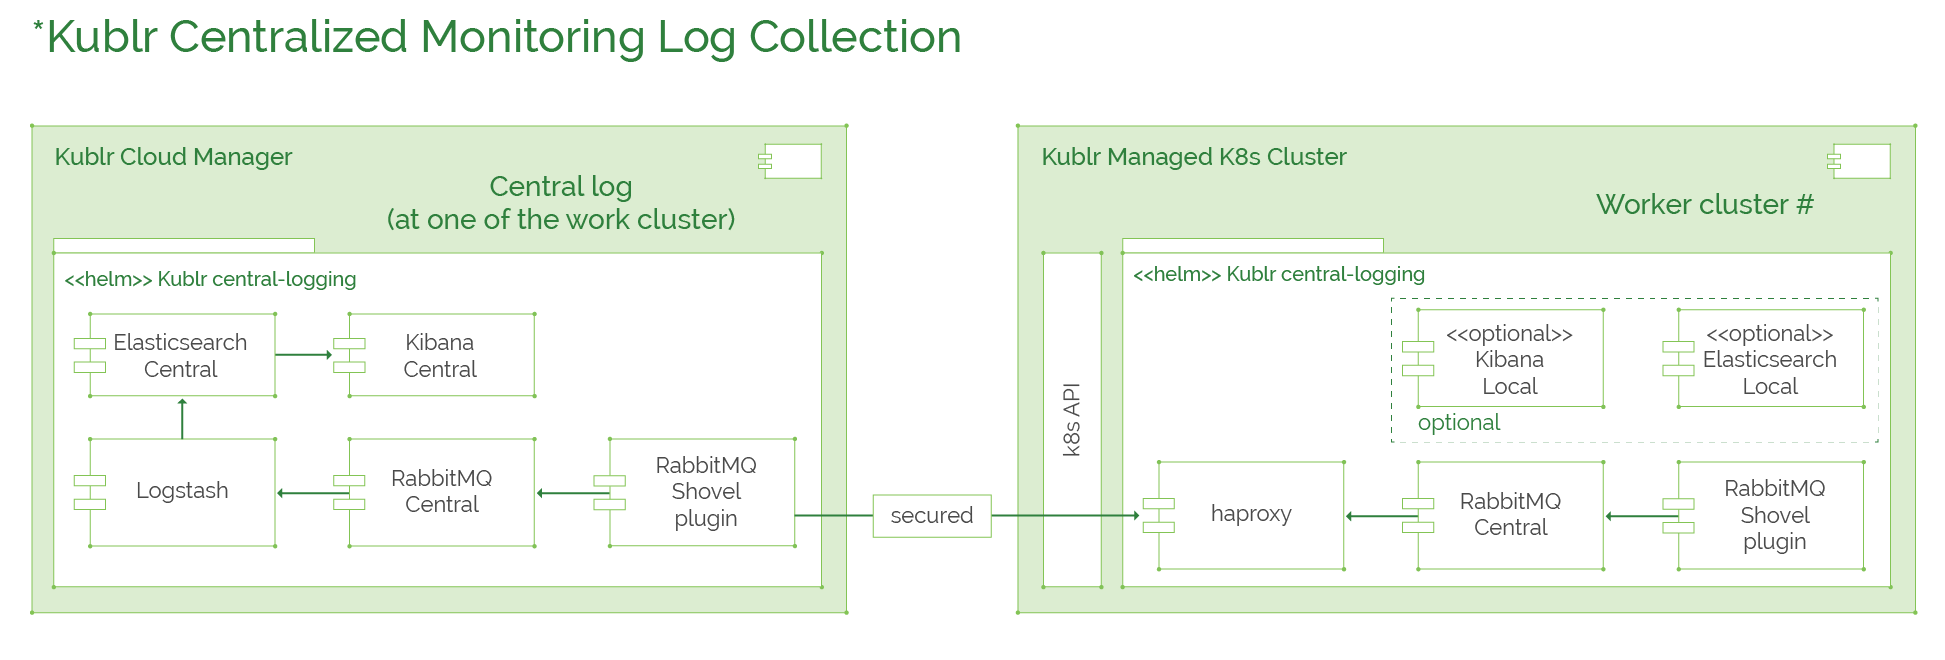 Centralized Log Collection